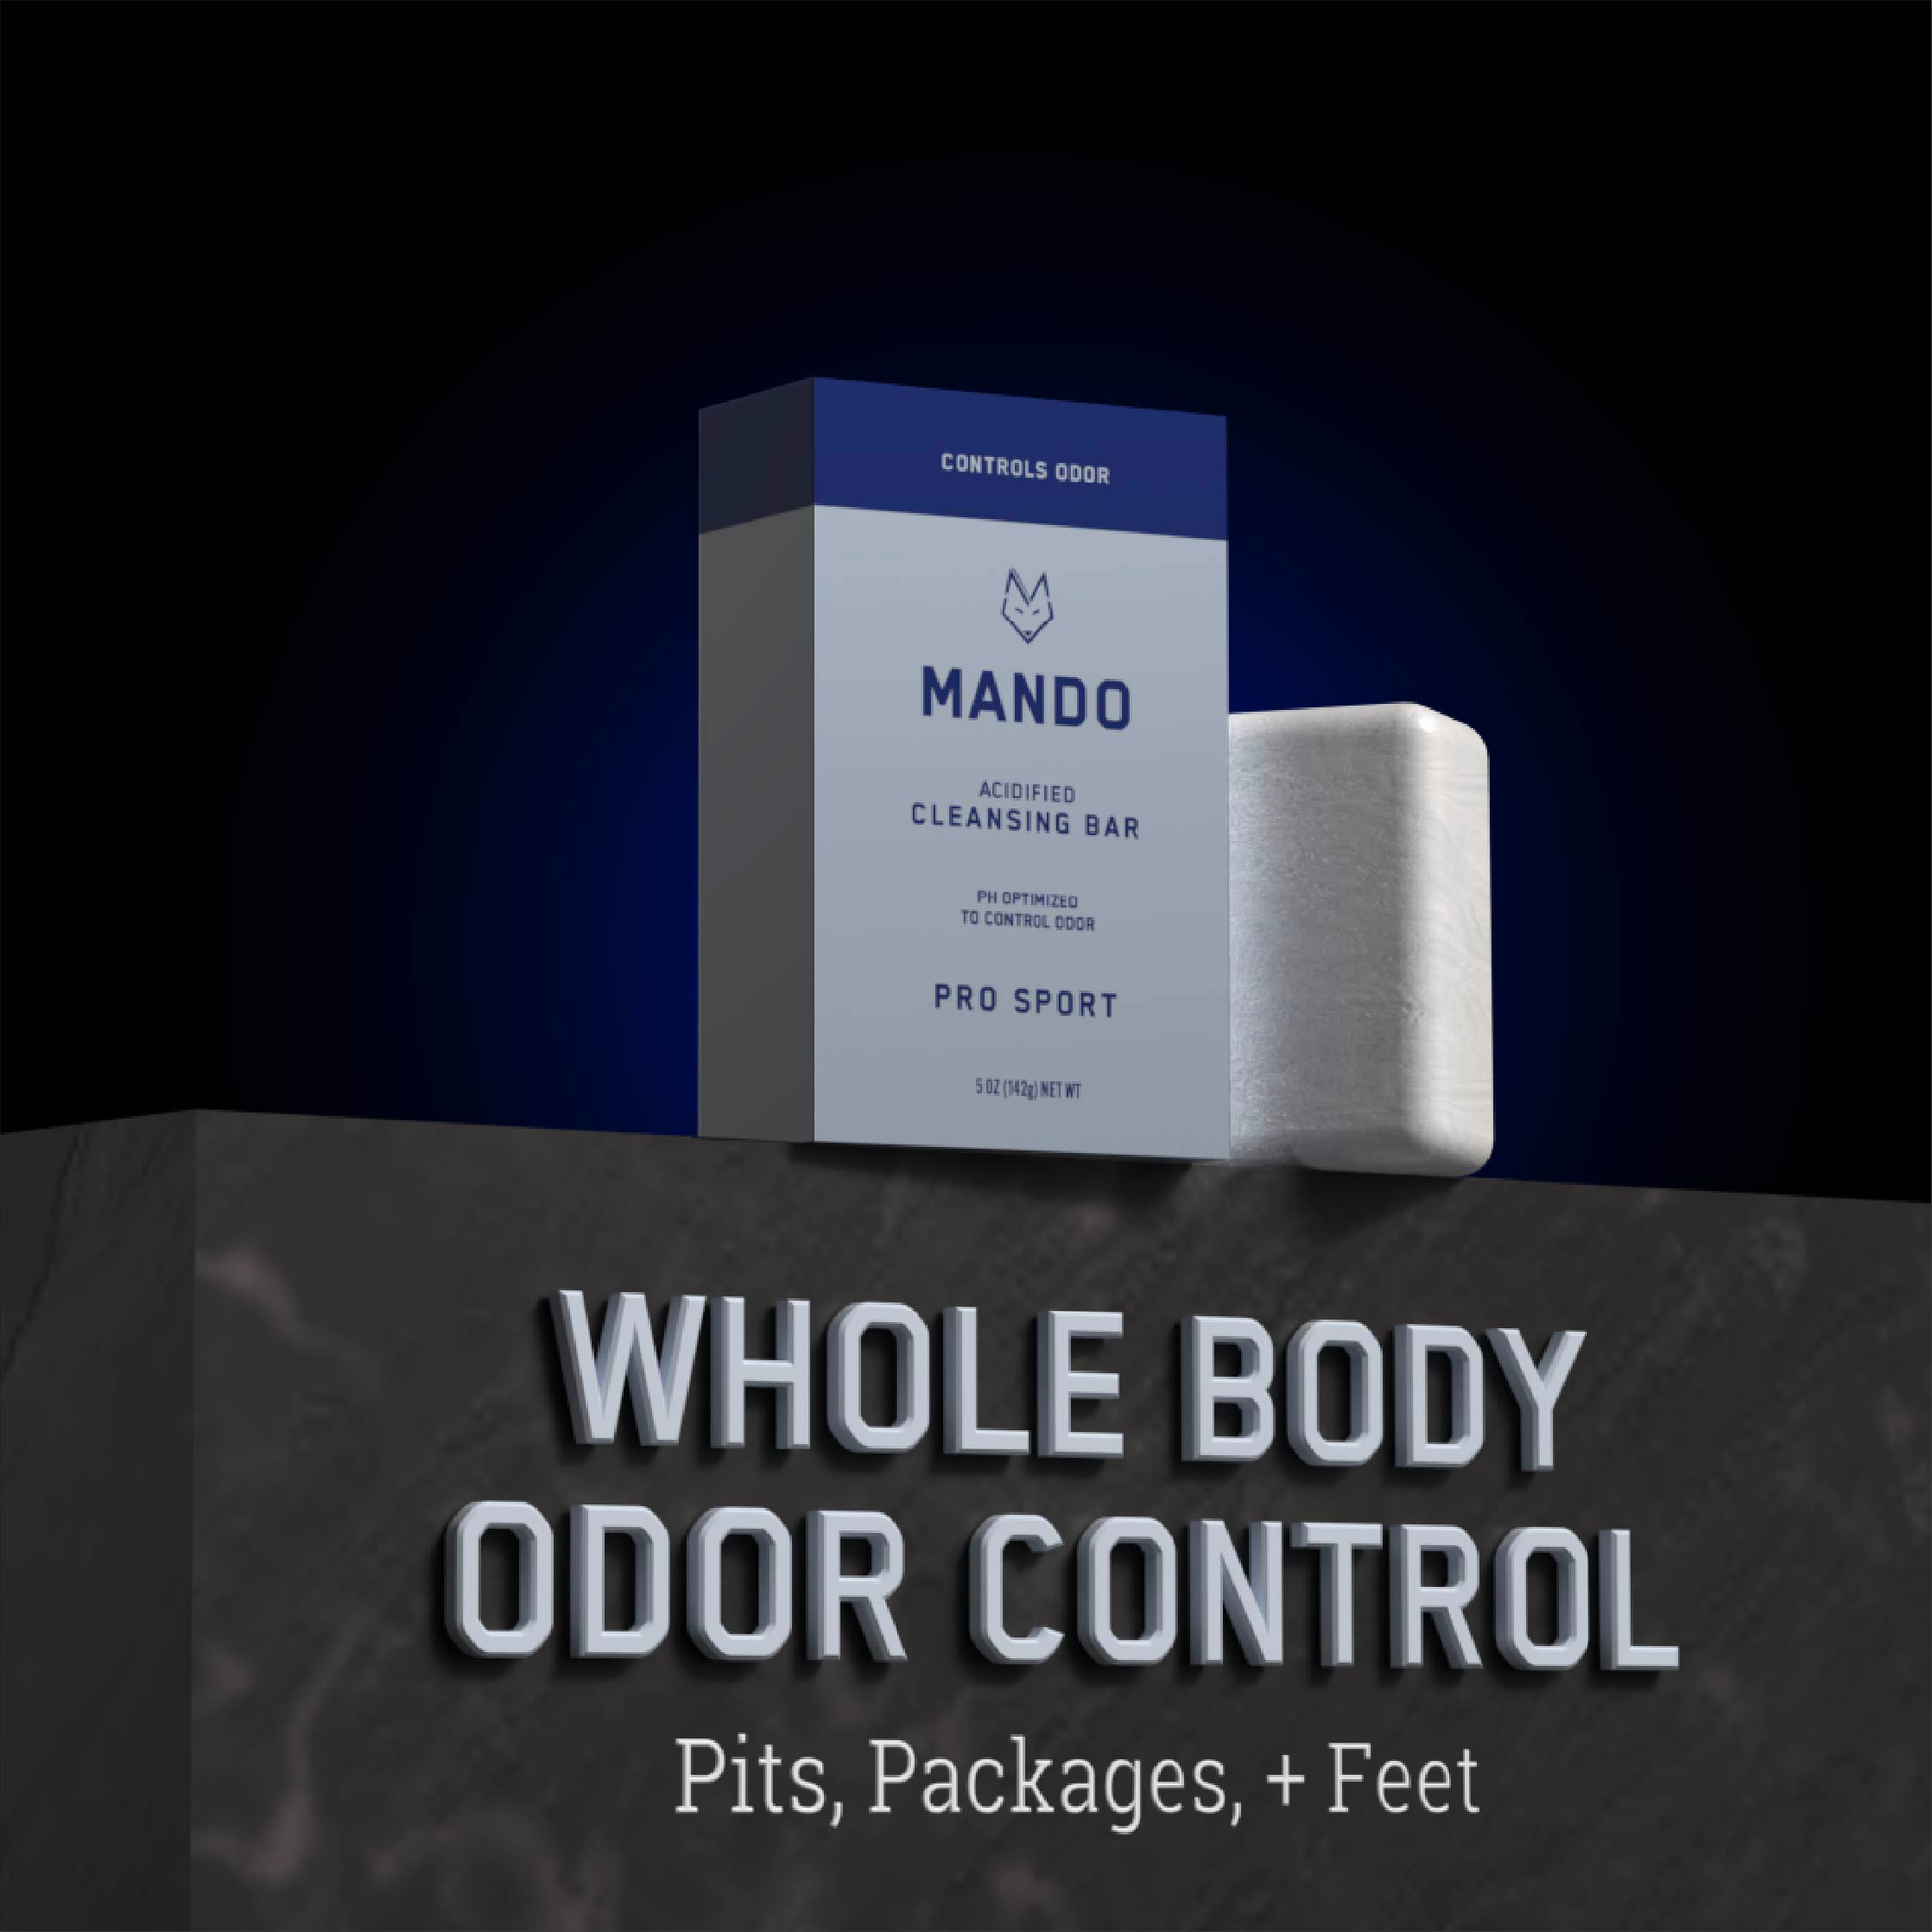 Bar of Mando 4-in-1 acidified cleansing bar in Pro Sport scent with text: whole body odor control, pits, packages + feet